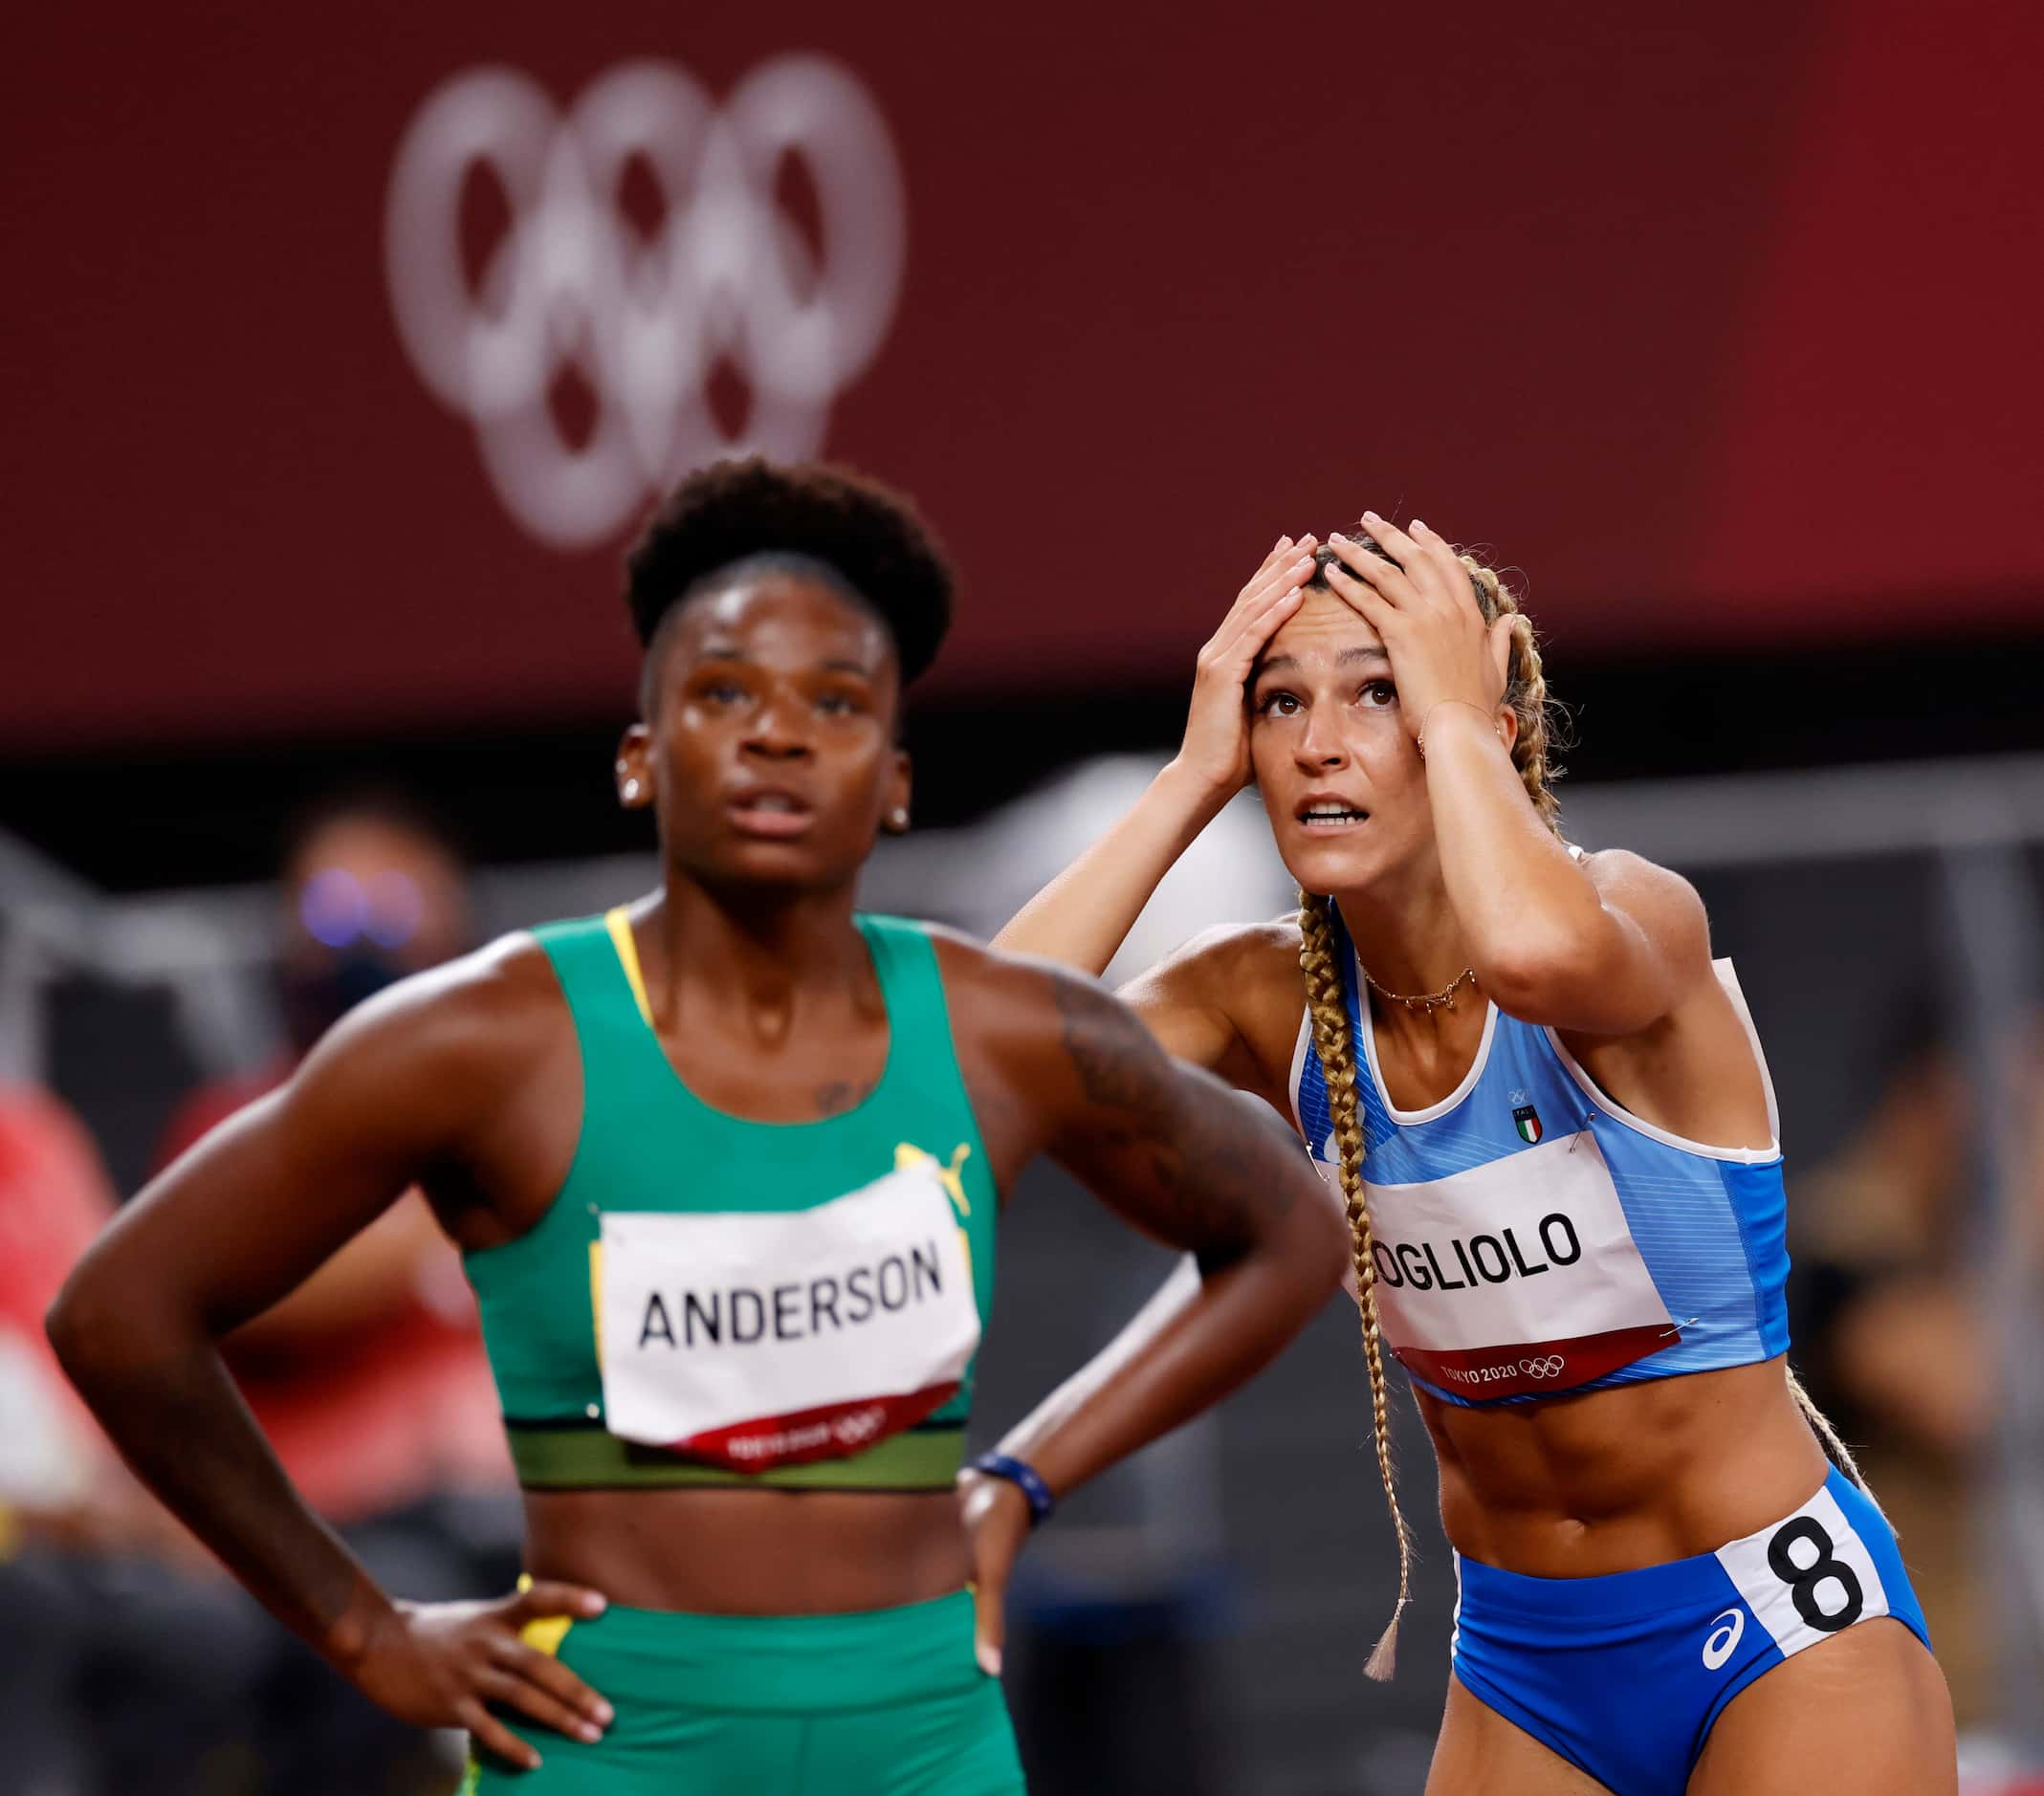 Italy’s Luminosa Bogliolo reacts after seeing her final time of 12.75 seconds in the women’s...